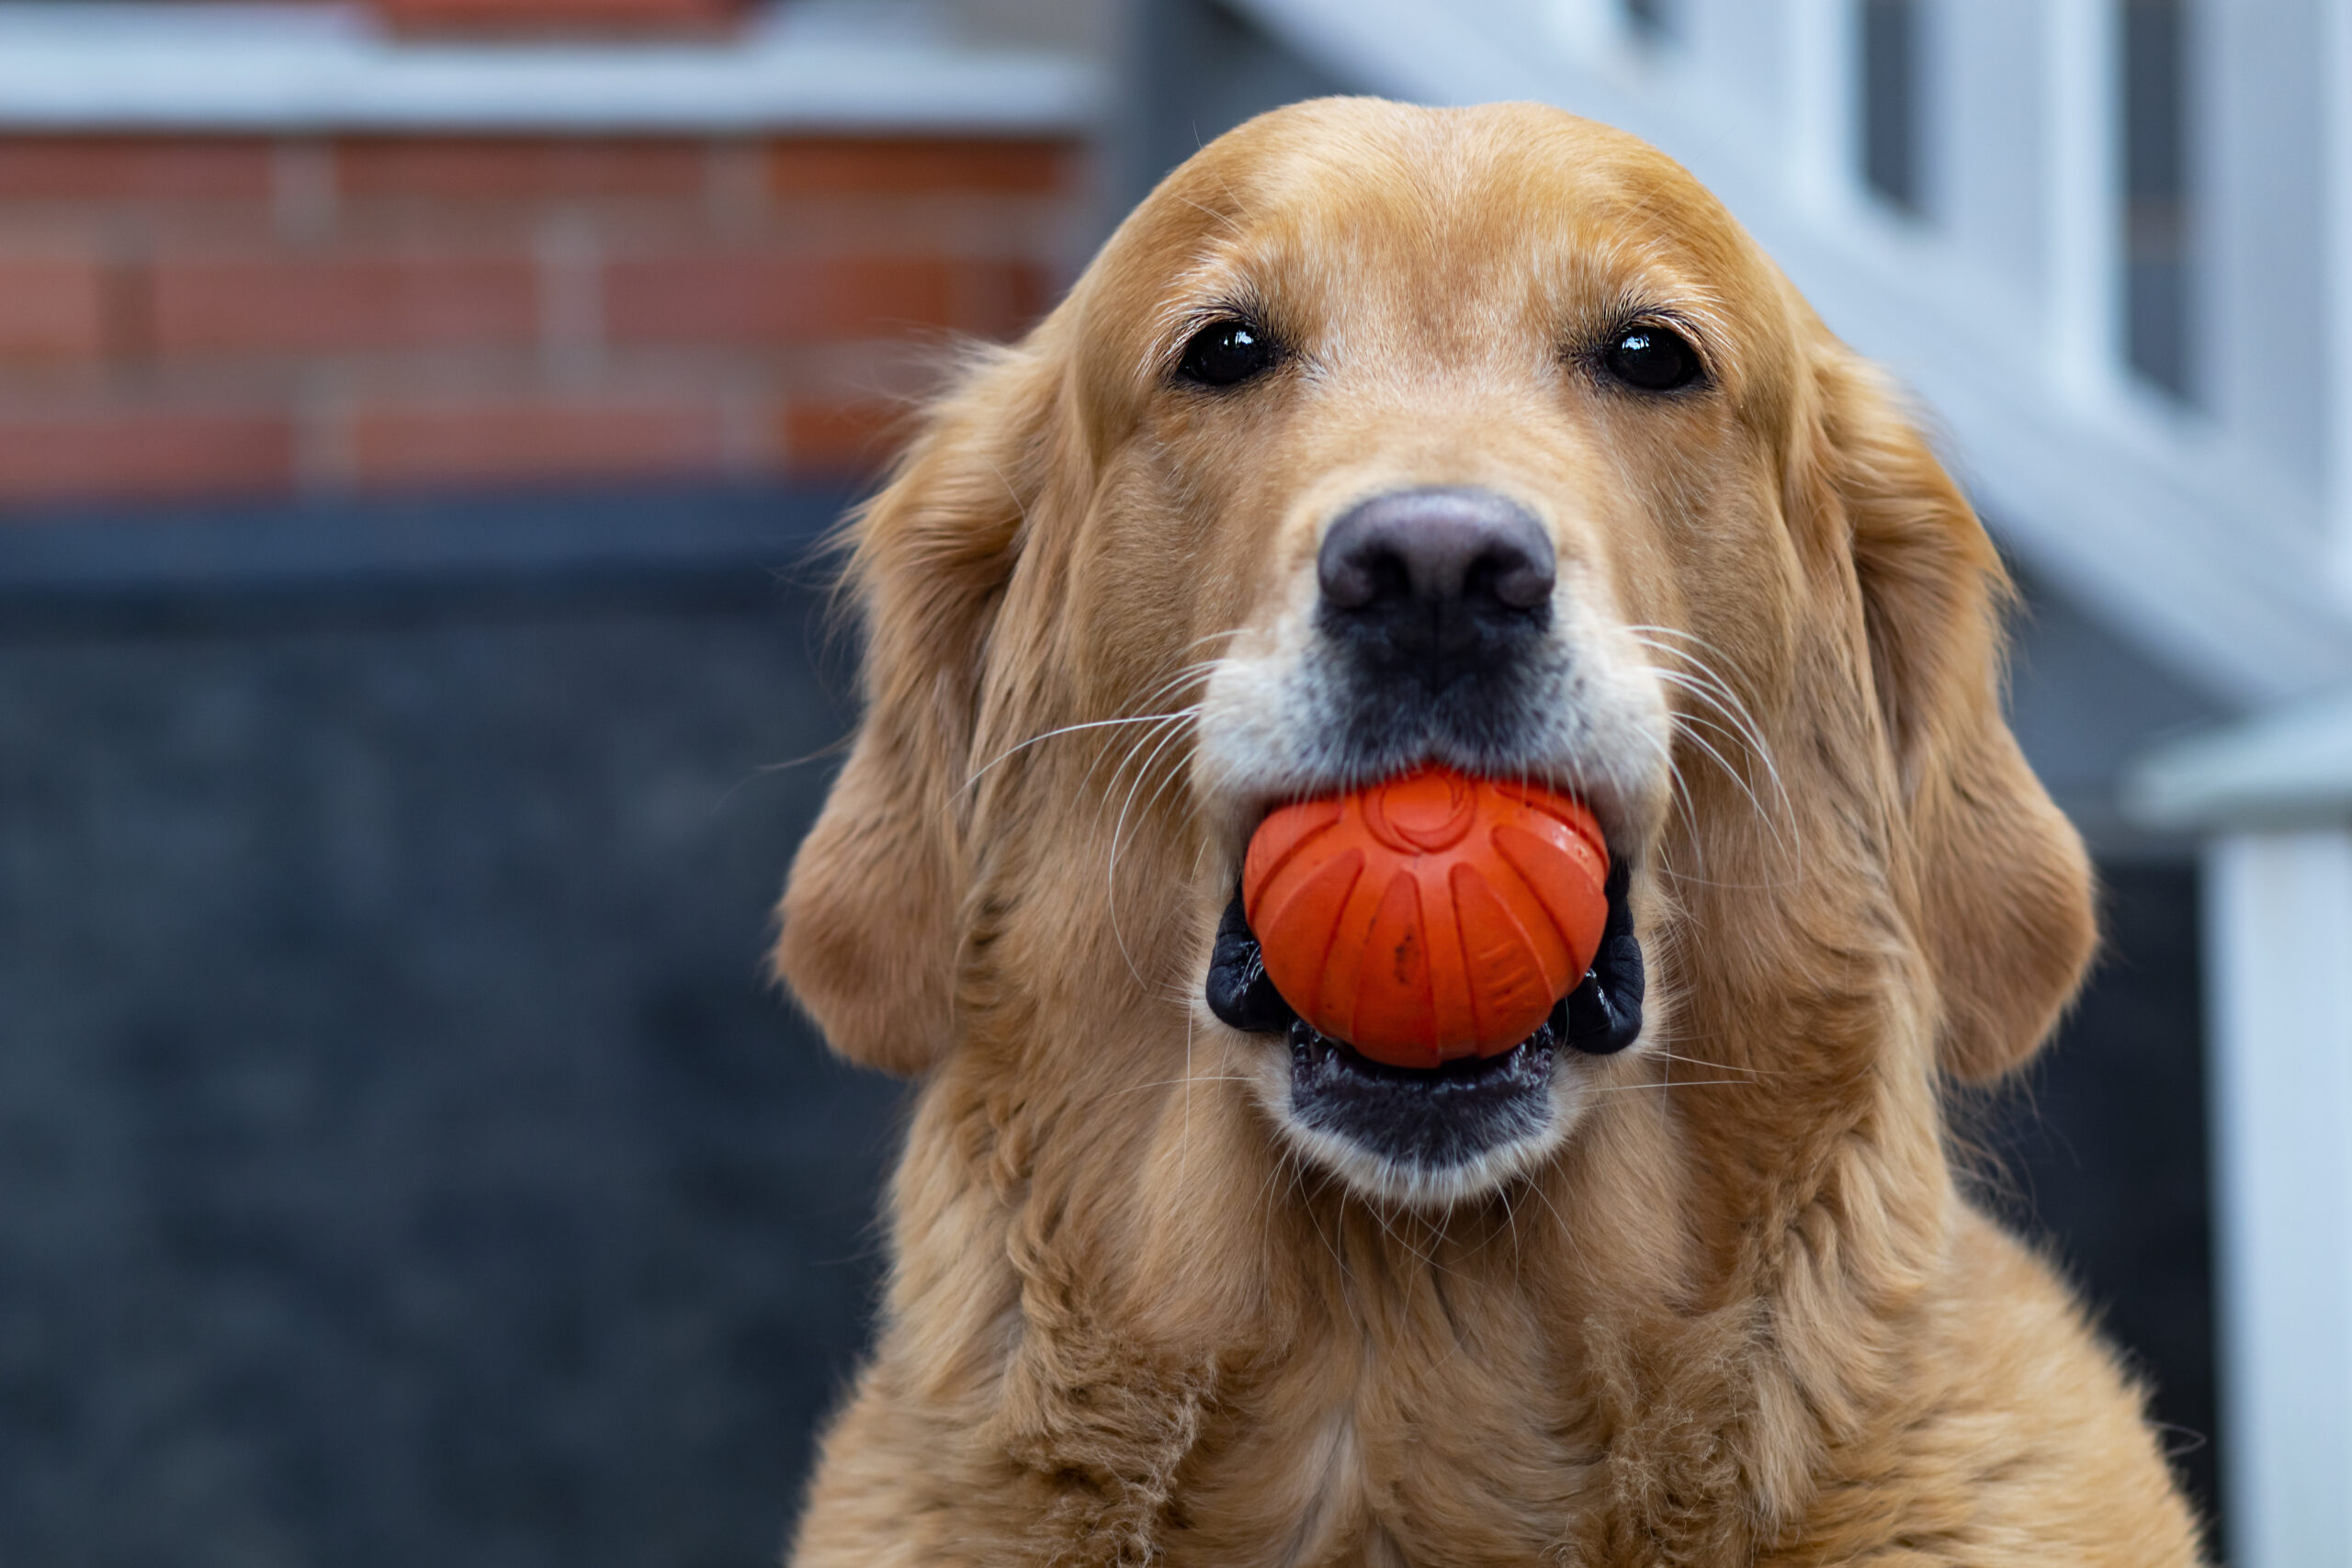 Buying guide For Picking Best Dog Toys